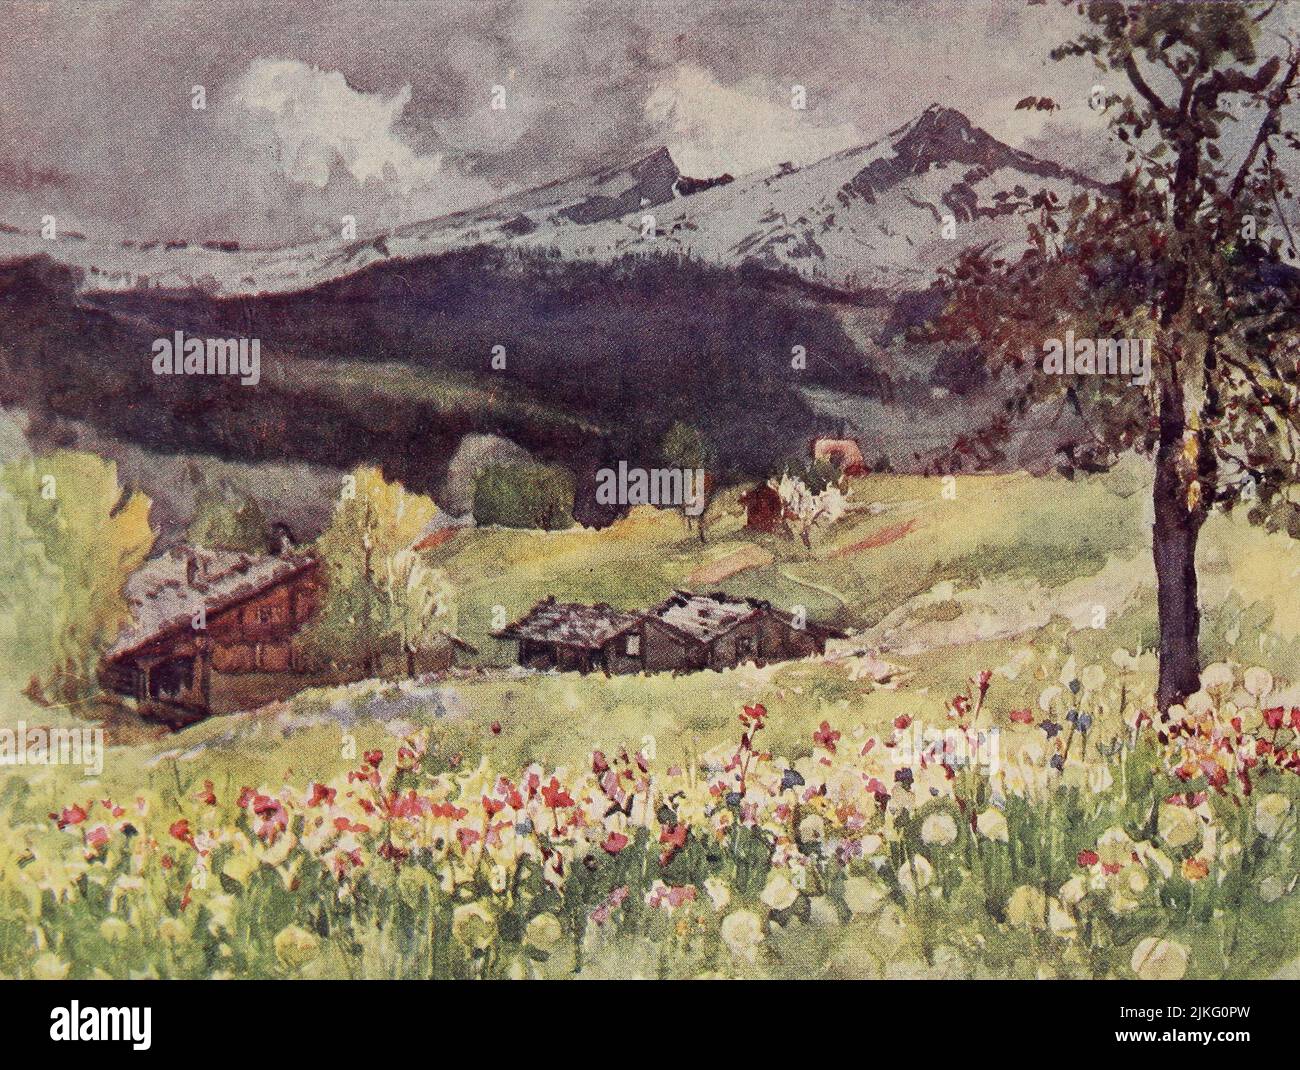 Grindelwald looking towards the Wengen Alp. Winter snow on the slopes Painted by A. D. McCormick from the book ' The Alps ' by Sir William Martin Conway,  Publication date 1904 Publisher London : Adam and Charles Black Arthur David McCormick FRGS (Coleraine 14 October 1860 – 1943) was a notable British illustrator and painter of landscapes, historical scenes, naval subjects, and genre scenes. Stock Photo